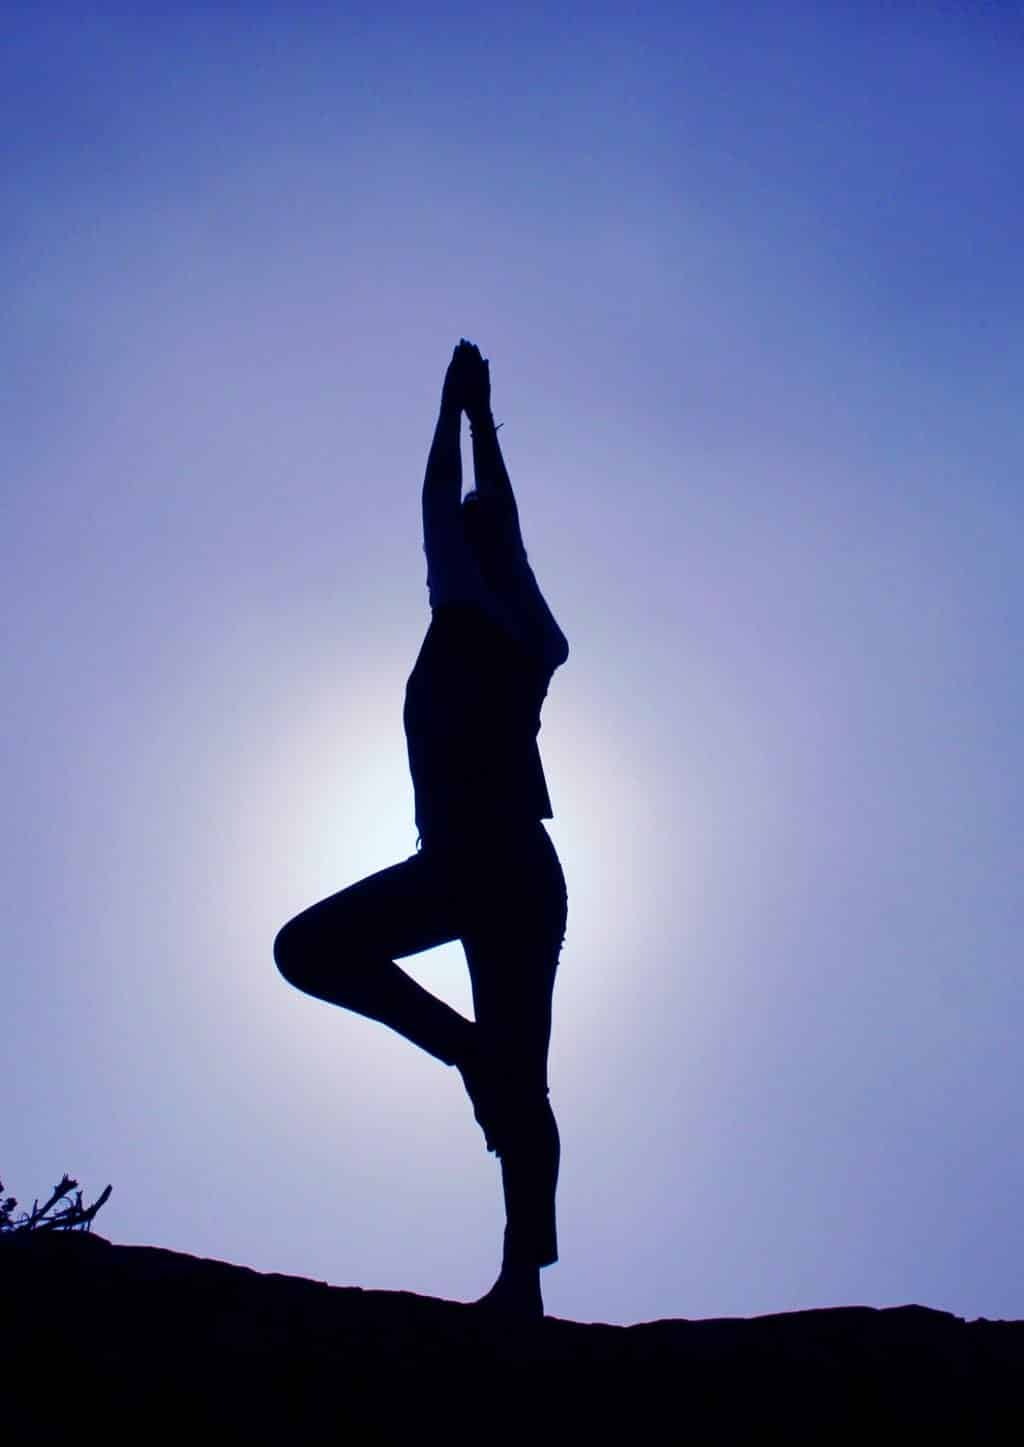 A silhouette of a person doing Yoga.